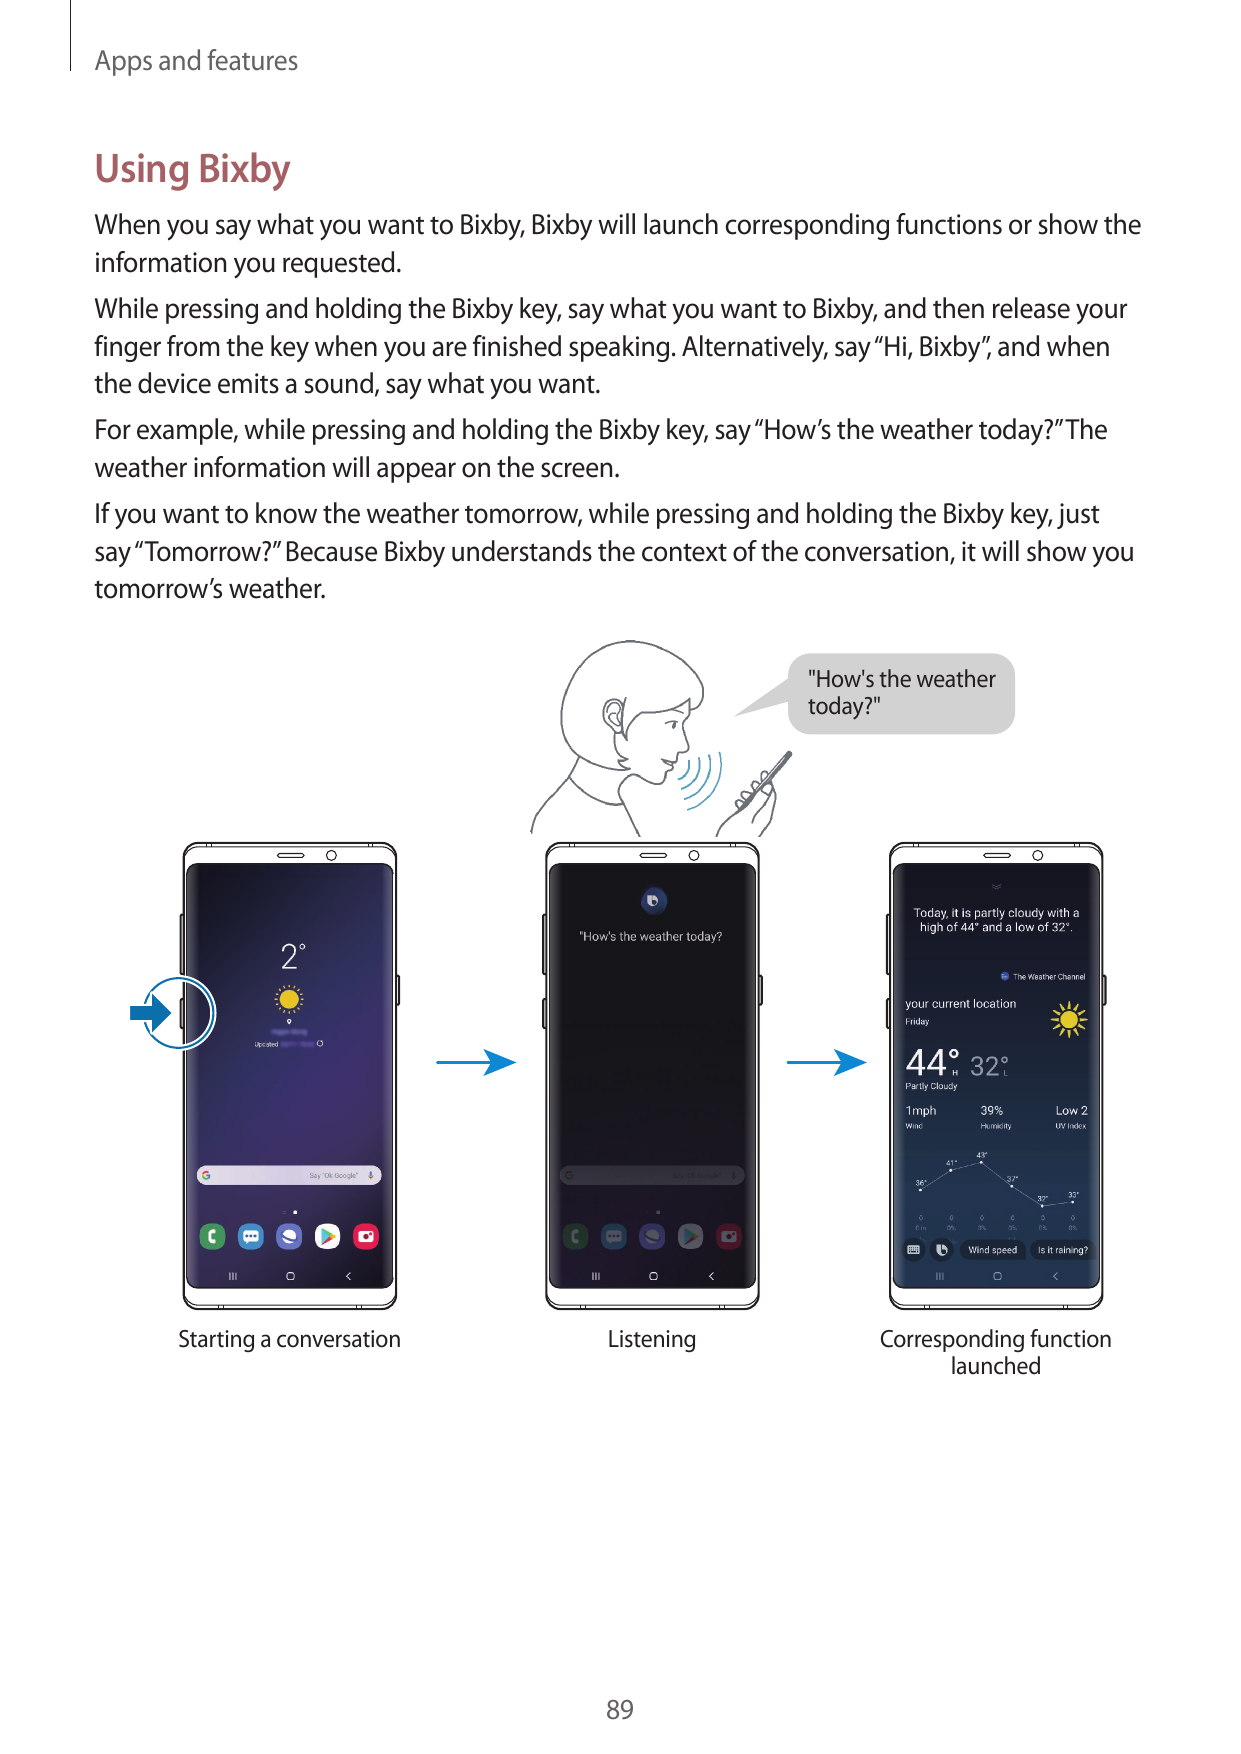 Apps and featuresUsing BixbyWhen you say what you want to Bixby, Bixby will launch corresponding functions or show theinformatio